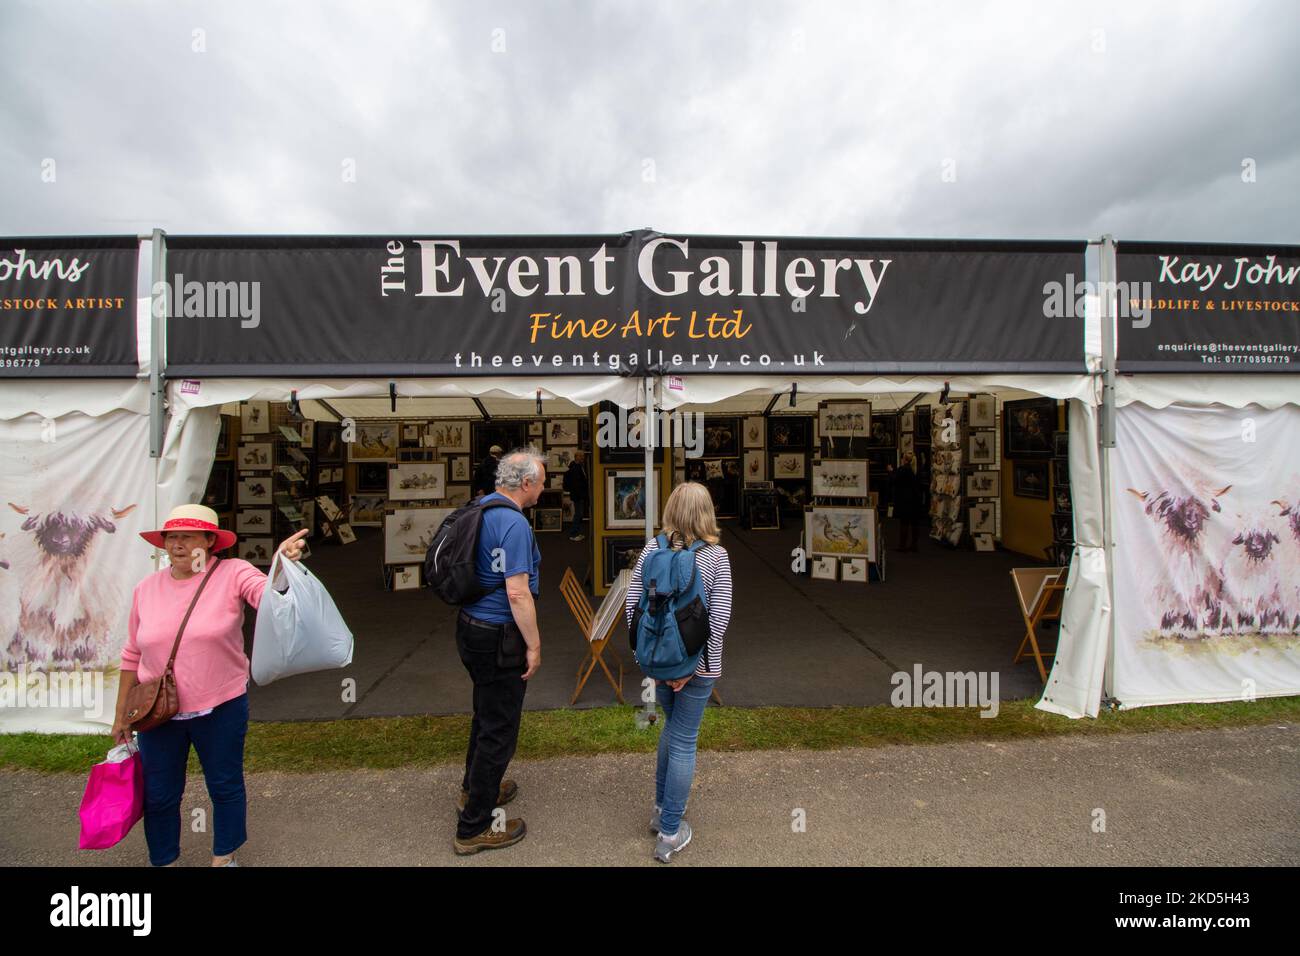 EXETER, DEVON, UK - JULY 1, 2022 Devon County Show trade stand on the second day of the show - The Event Gallery, Fine Art Ltd. Stock Photo